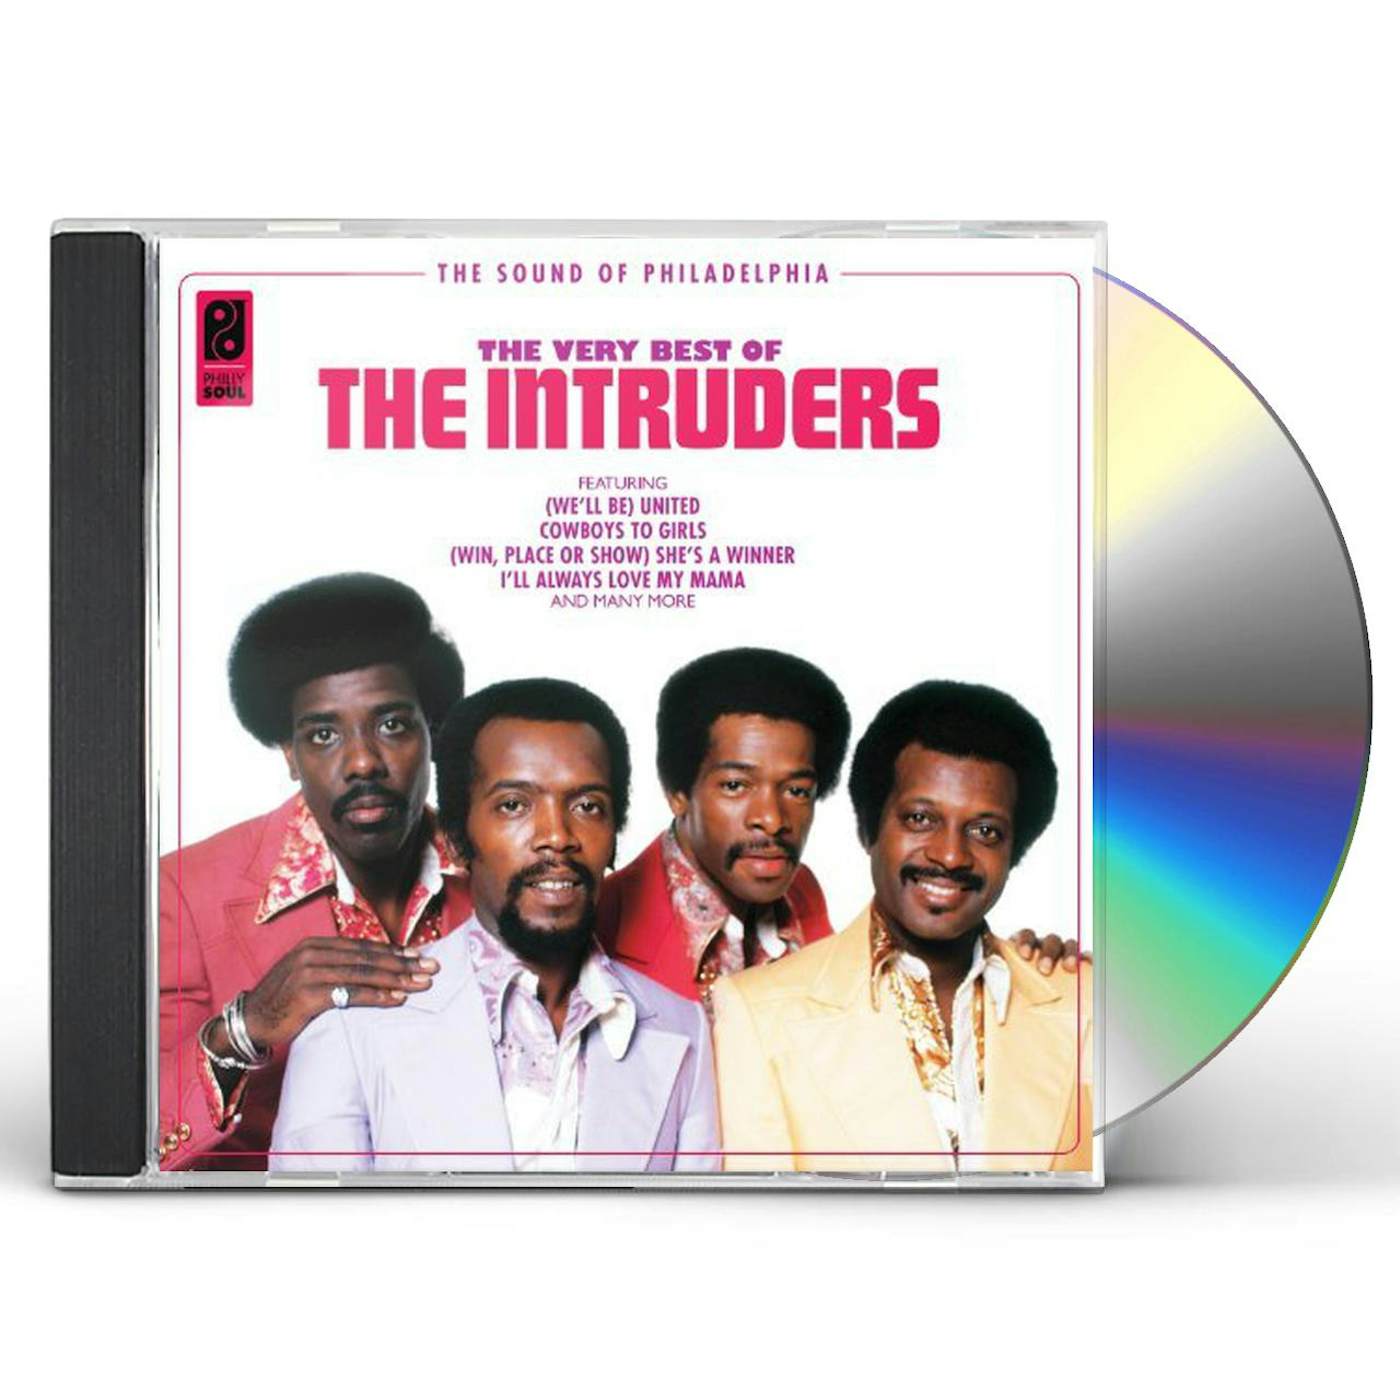 The Intruders - 1968 - Cowboys To Girls Free Download